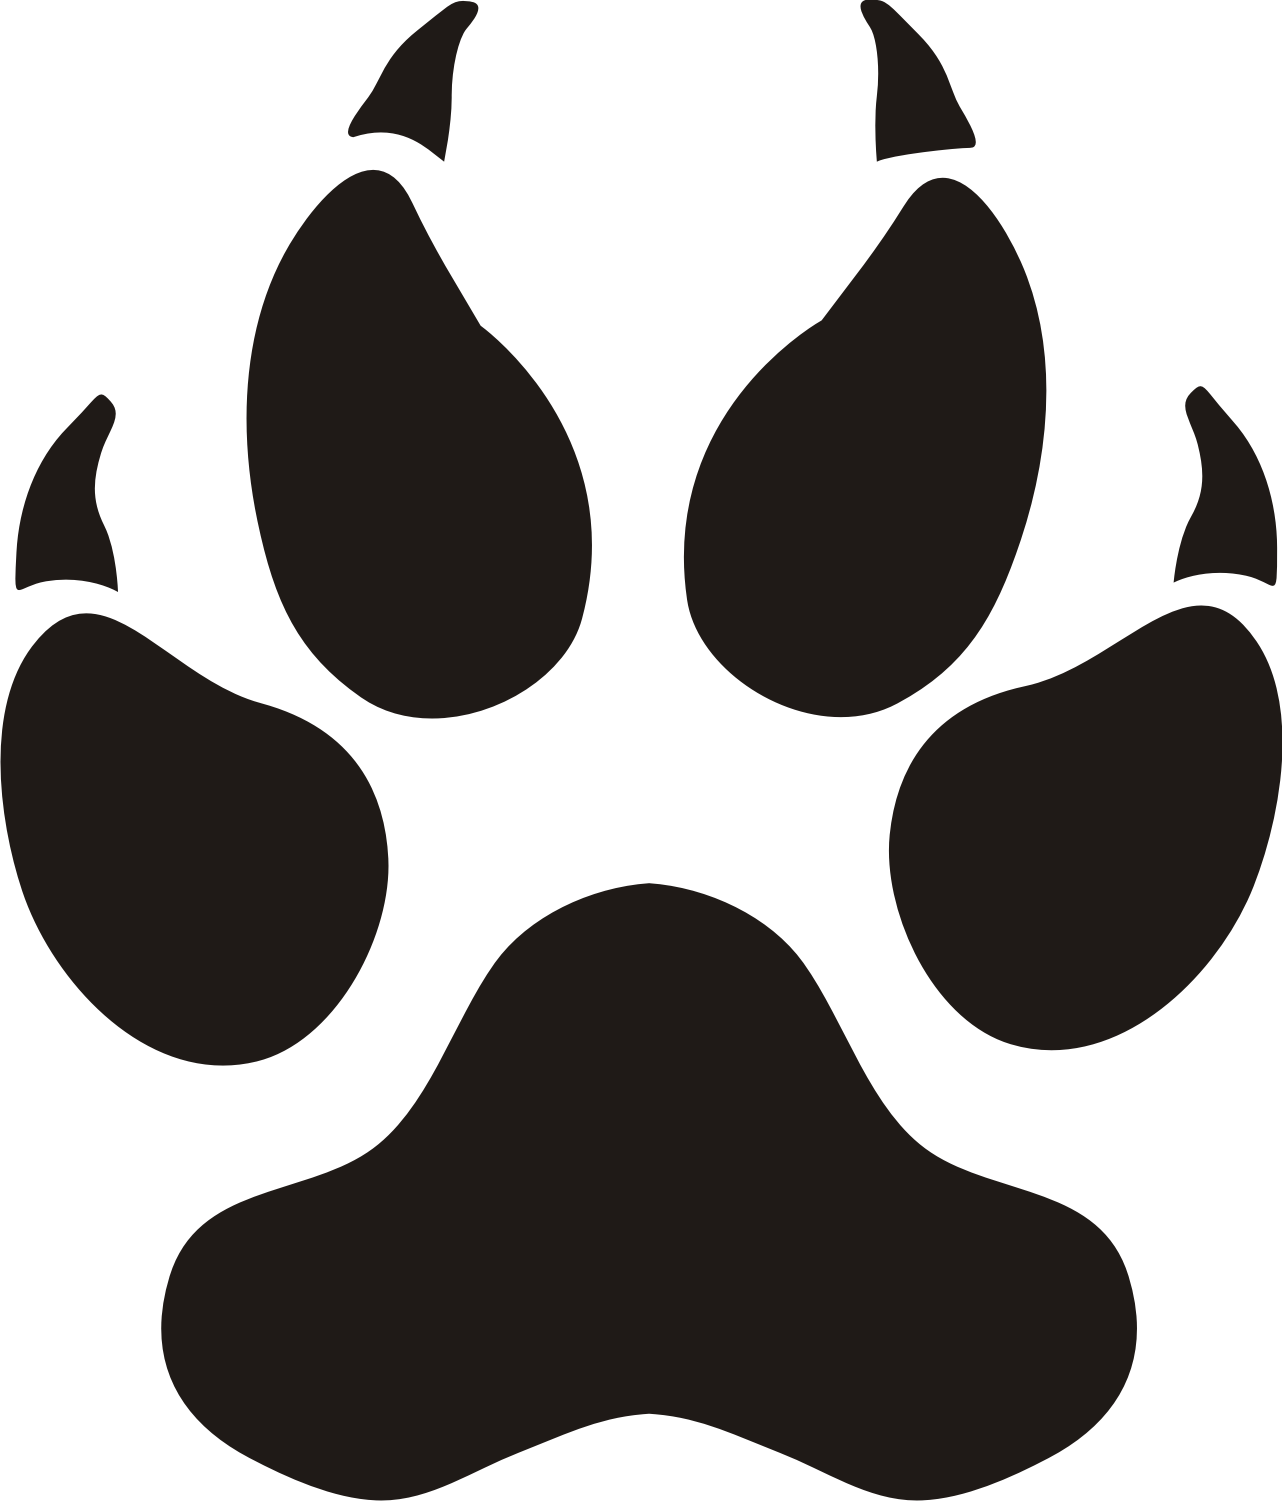 Dog paw prints, Clip art and Dog paws